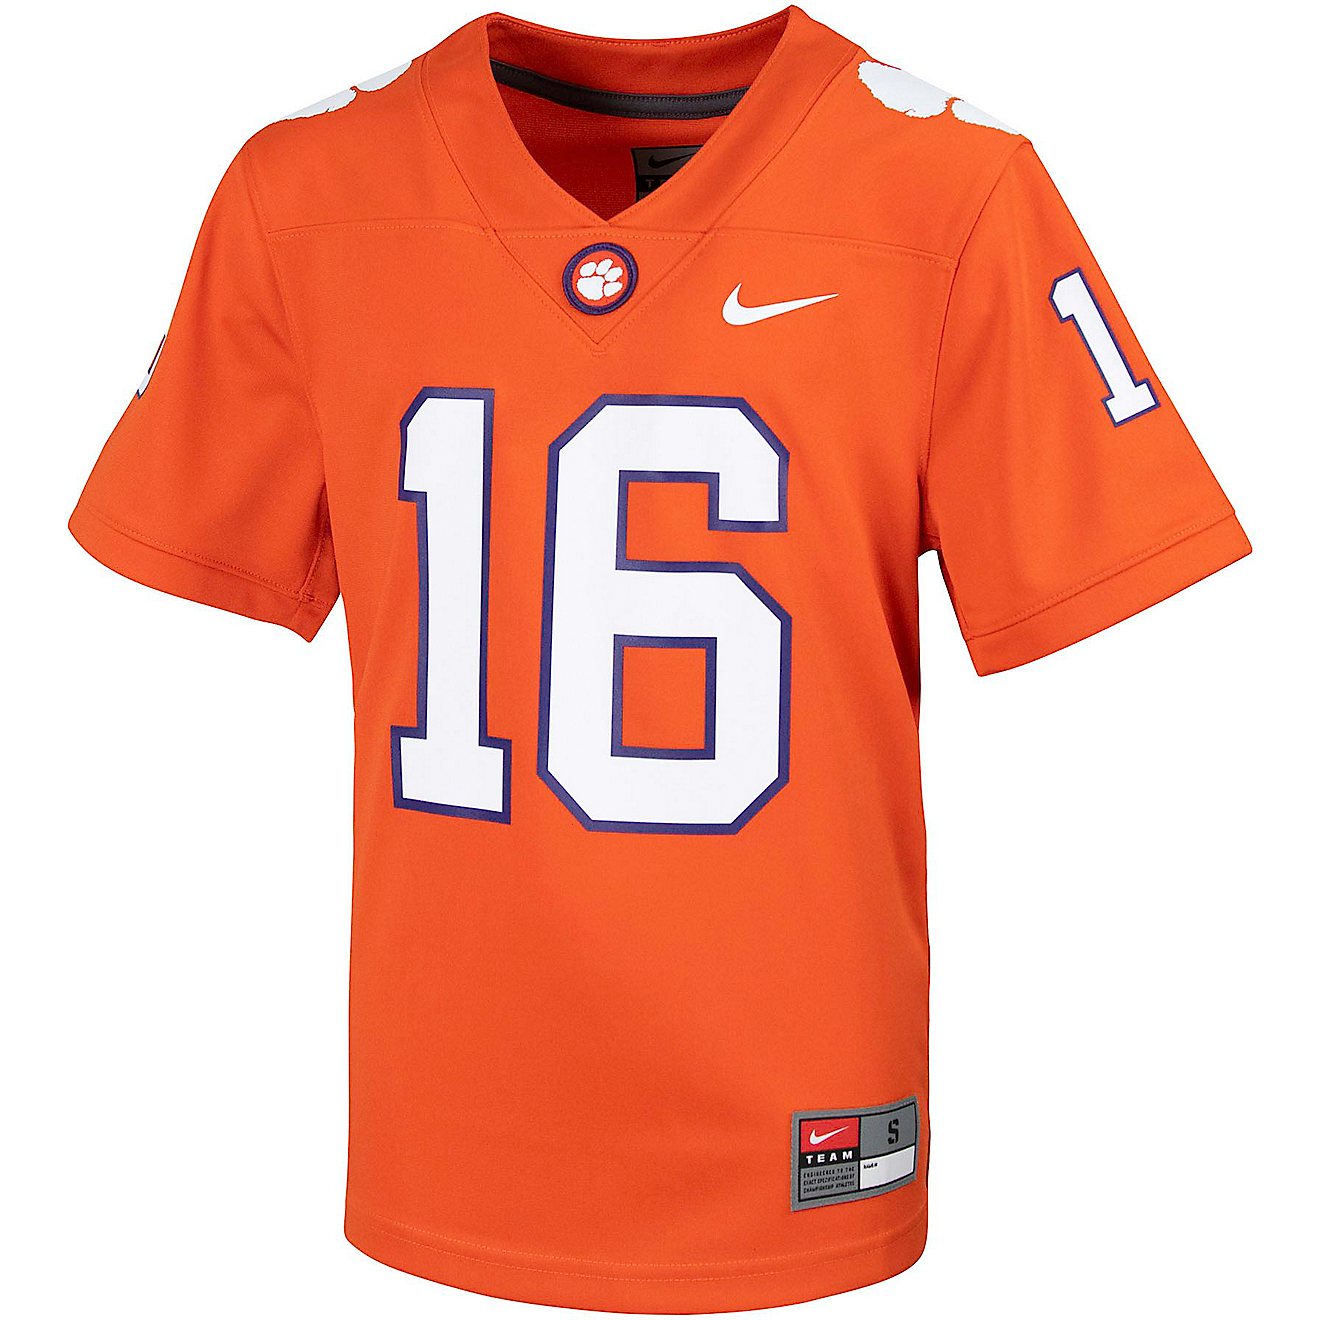 Nike Boys' Clemson University Young Athletes Replica Football Jersey                                                             - view number 1